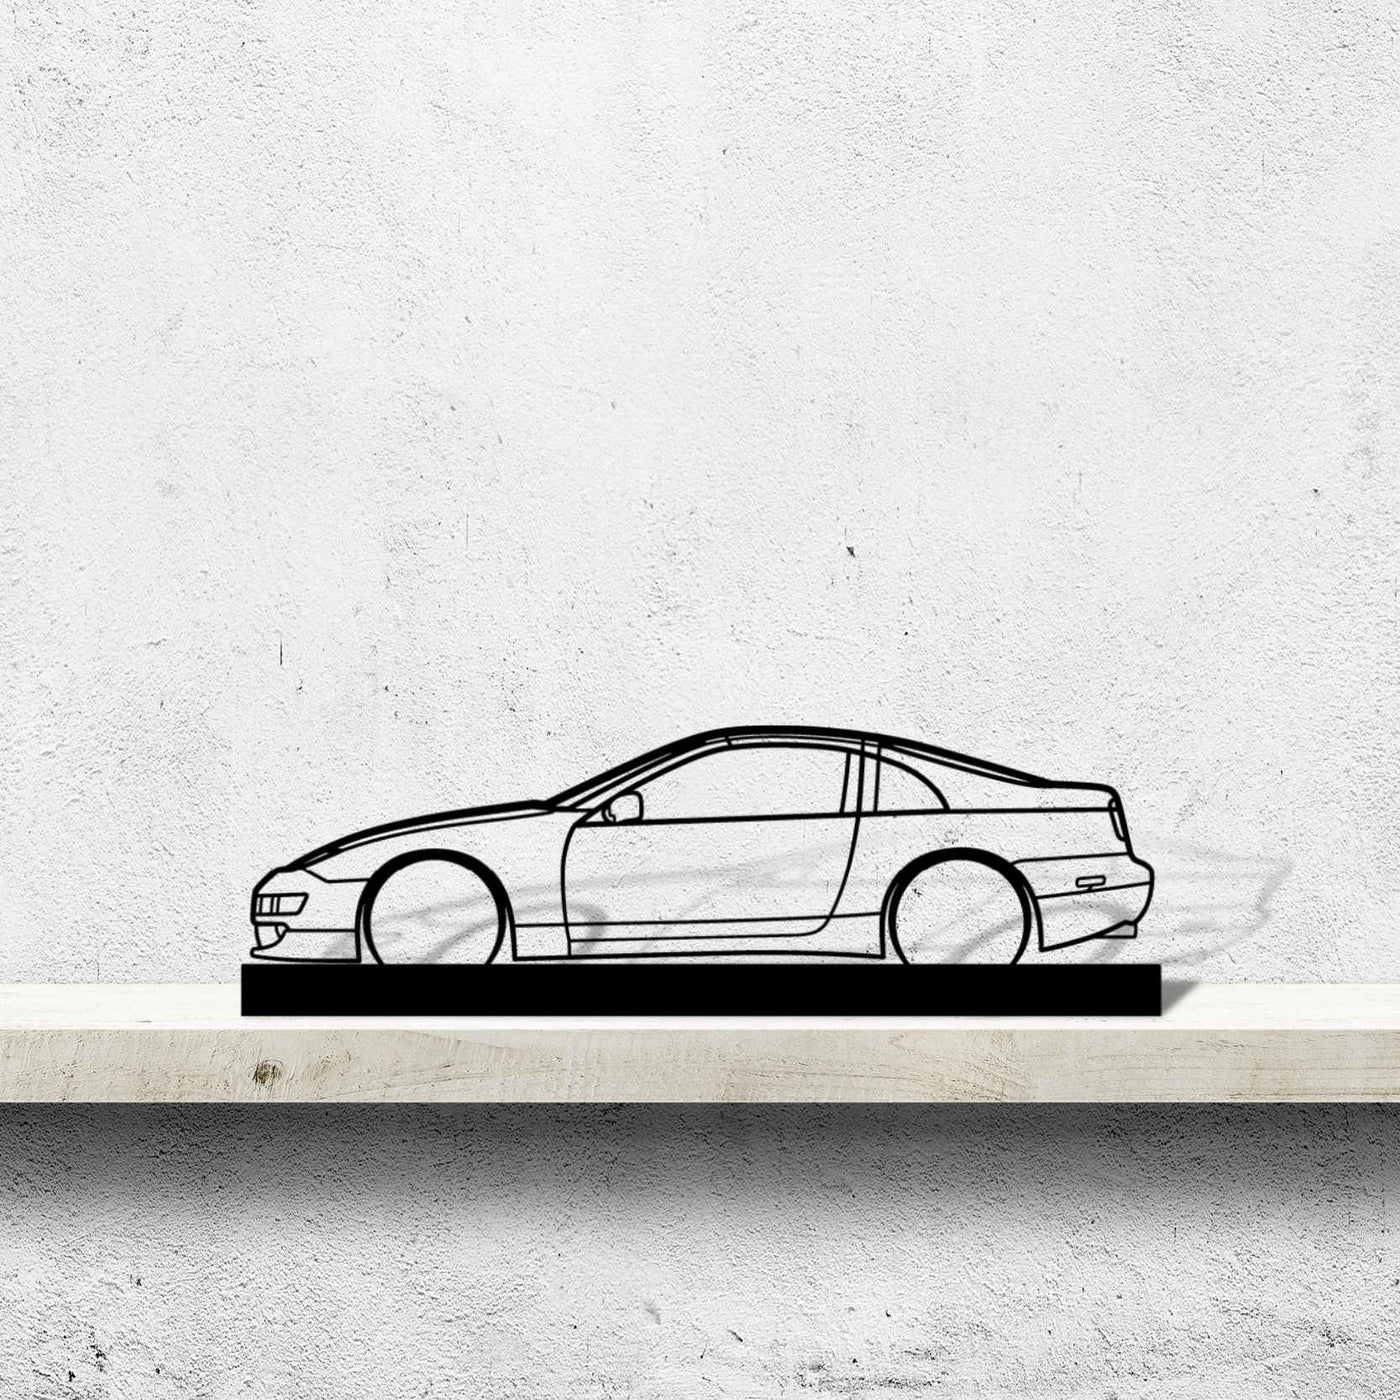 300zx Silhouette Metal Art Stand